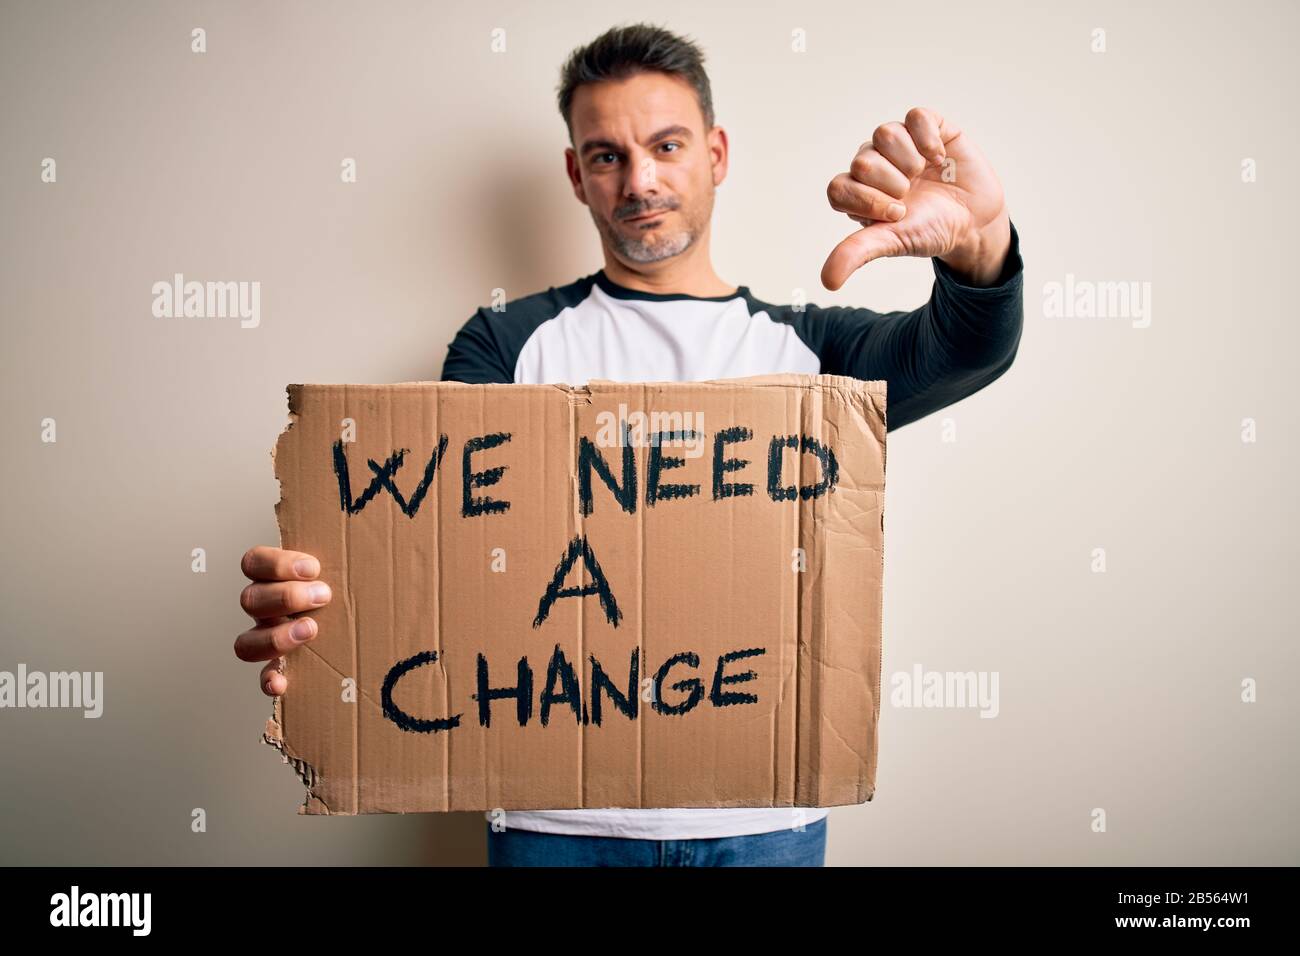 Young handsome activist man holding banner with change message over pink background with angry face, negative sign showing dislike with thumbs down, r Stock Photo